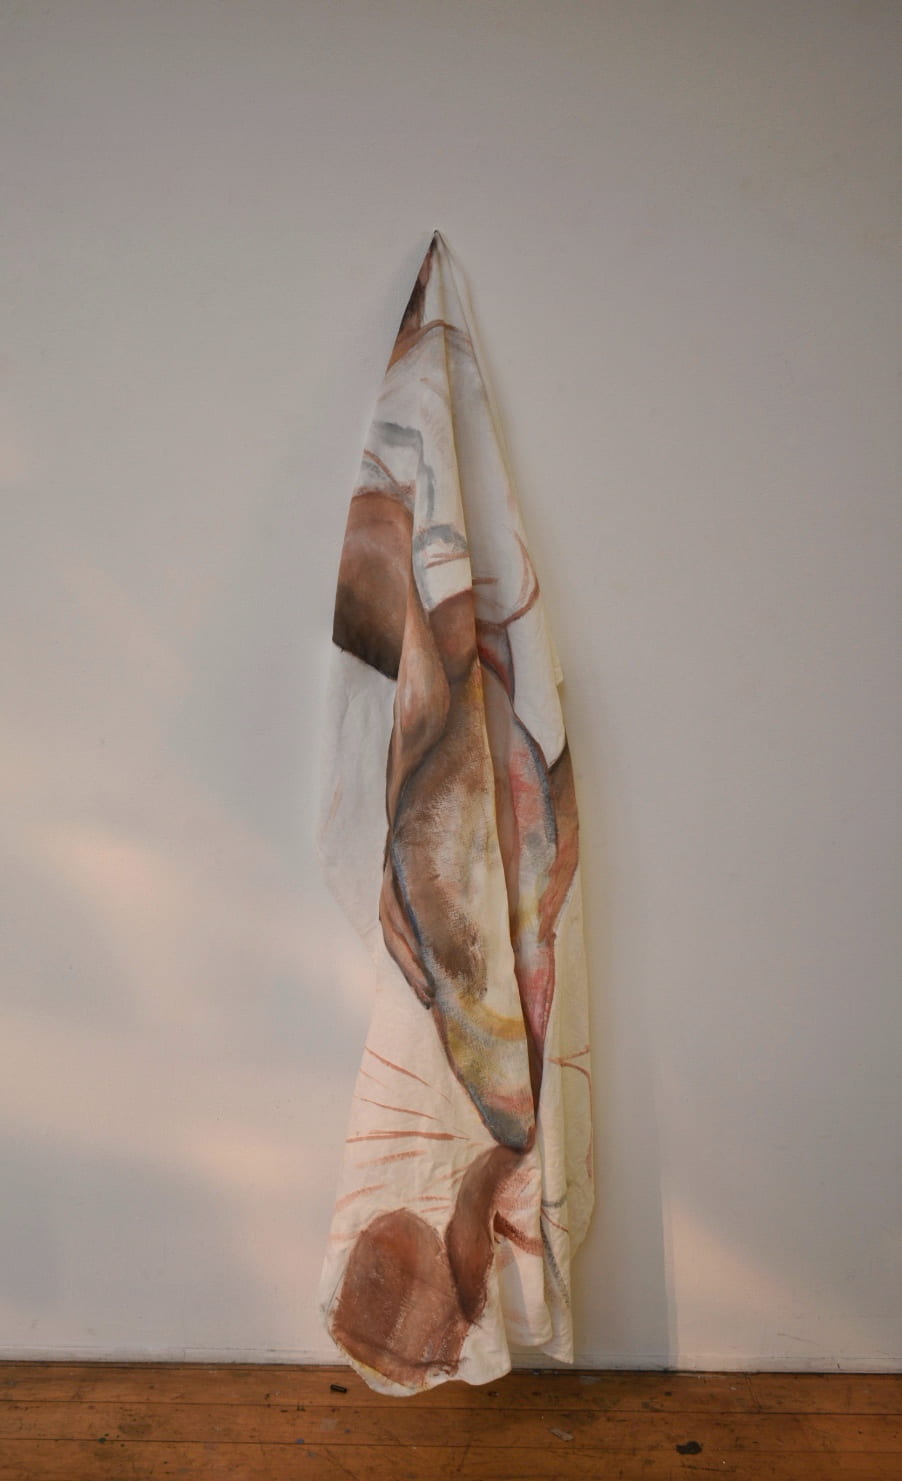 Figurative painting on a bed sheet draped on a pin on a wall